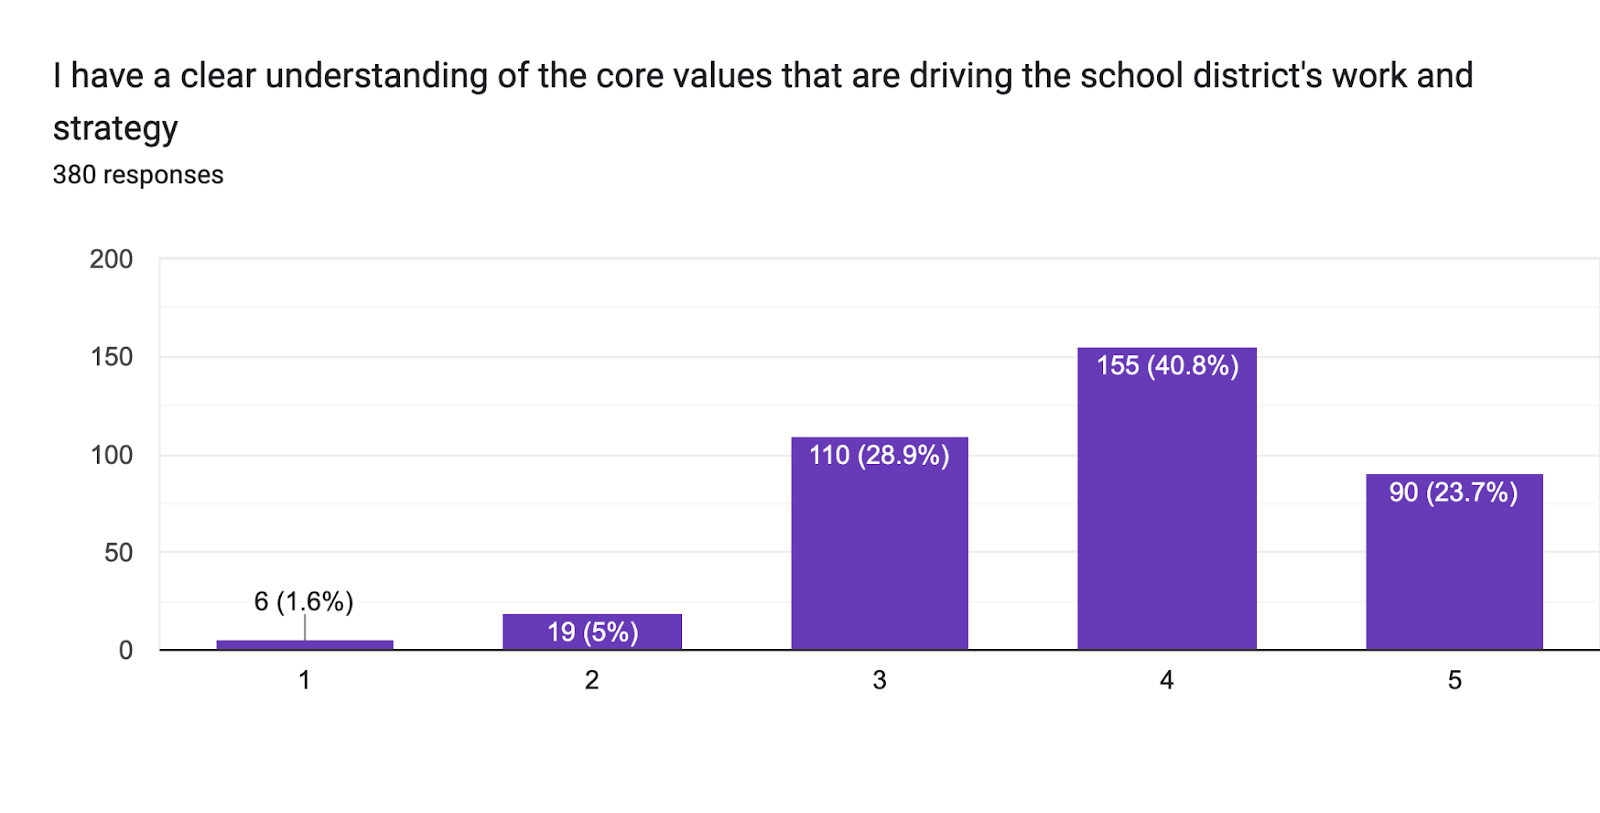 Forms response chart. Question title: I have a clear understanding of the core values that are driving the school district's work and strategy. Number of responses: 380 responses.